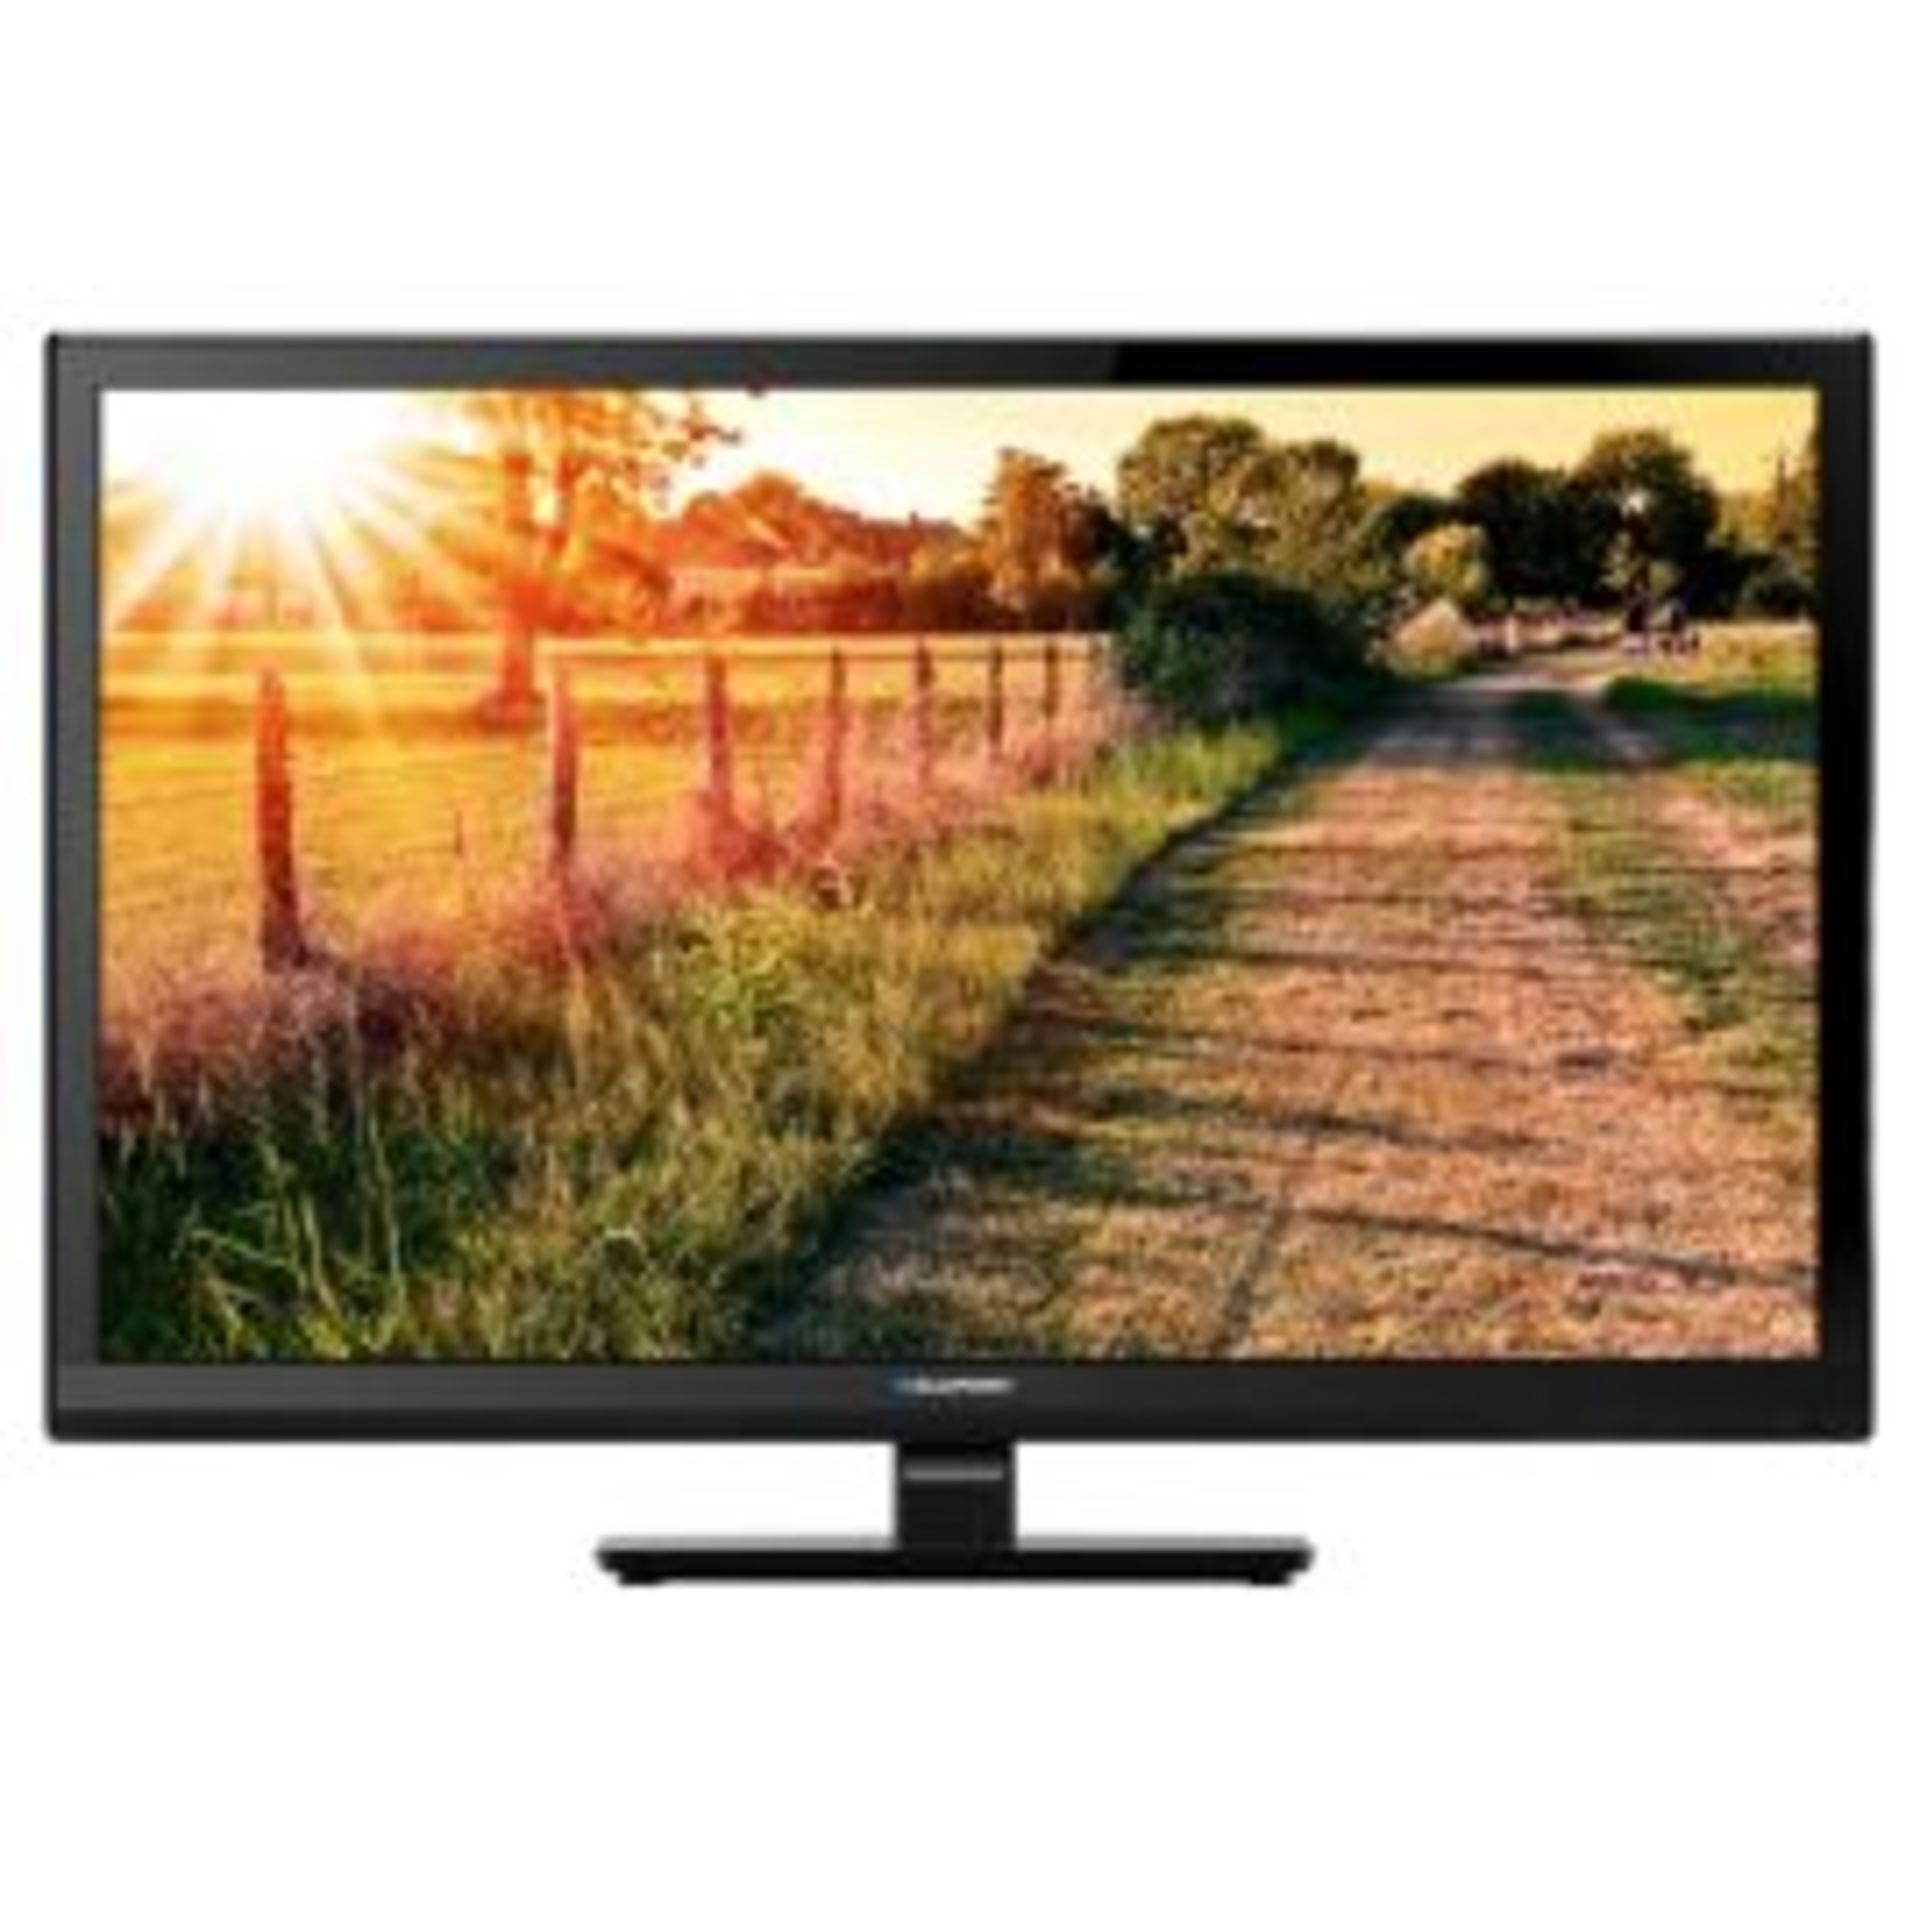 BLAUPUNKT 185 19" Widescreen LED TV, Freeview, HD Ready, 2 x HDMI , DTS Surround , USB.